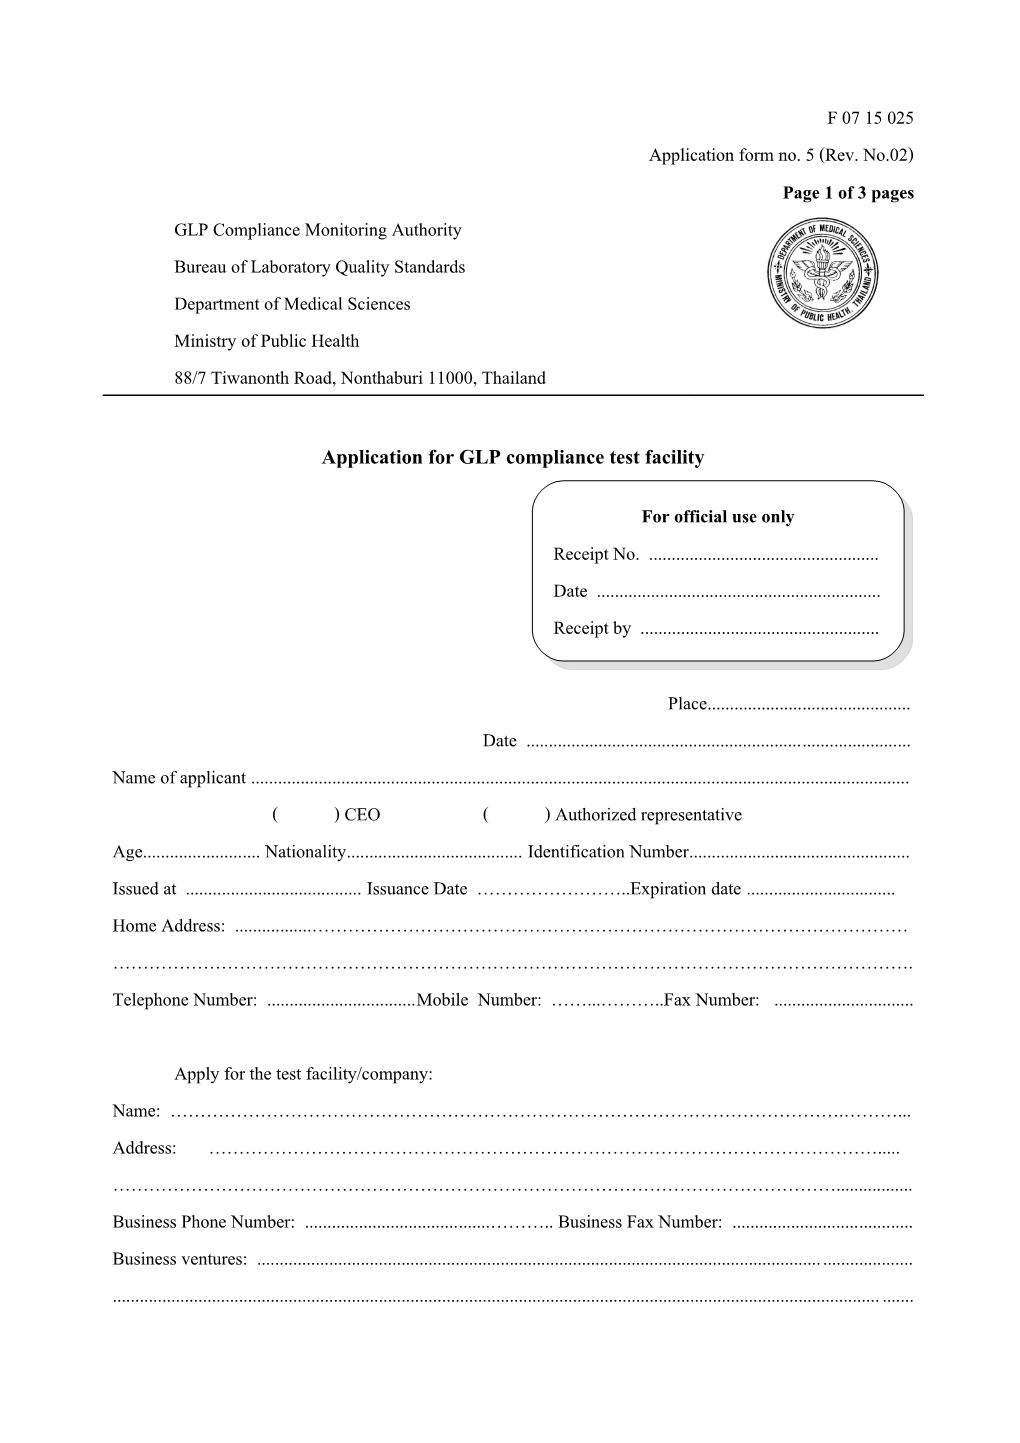 Application for Glpcompliance Test Facility